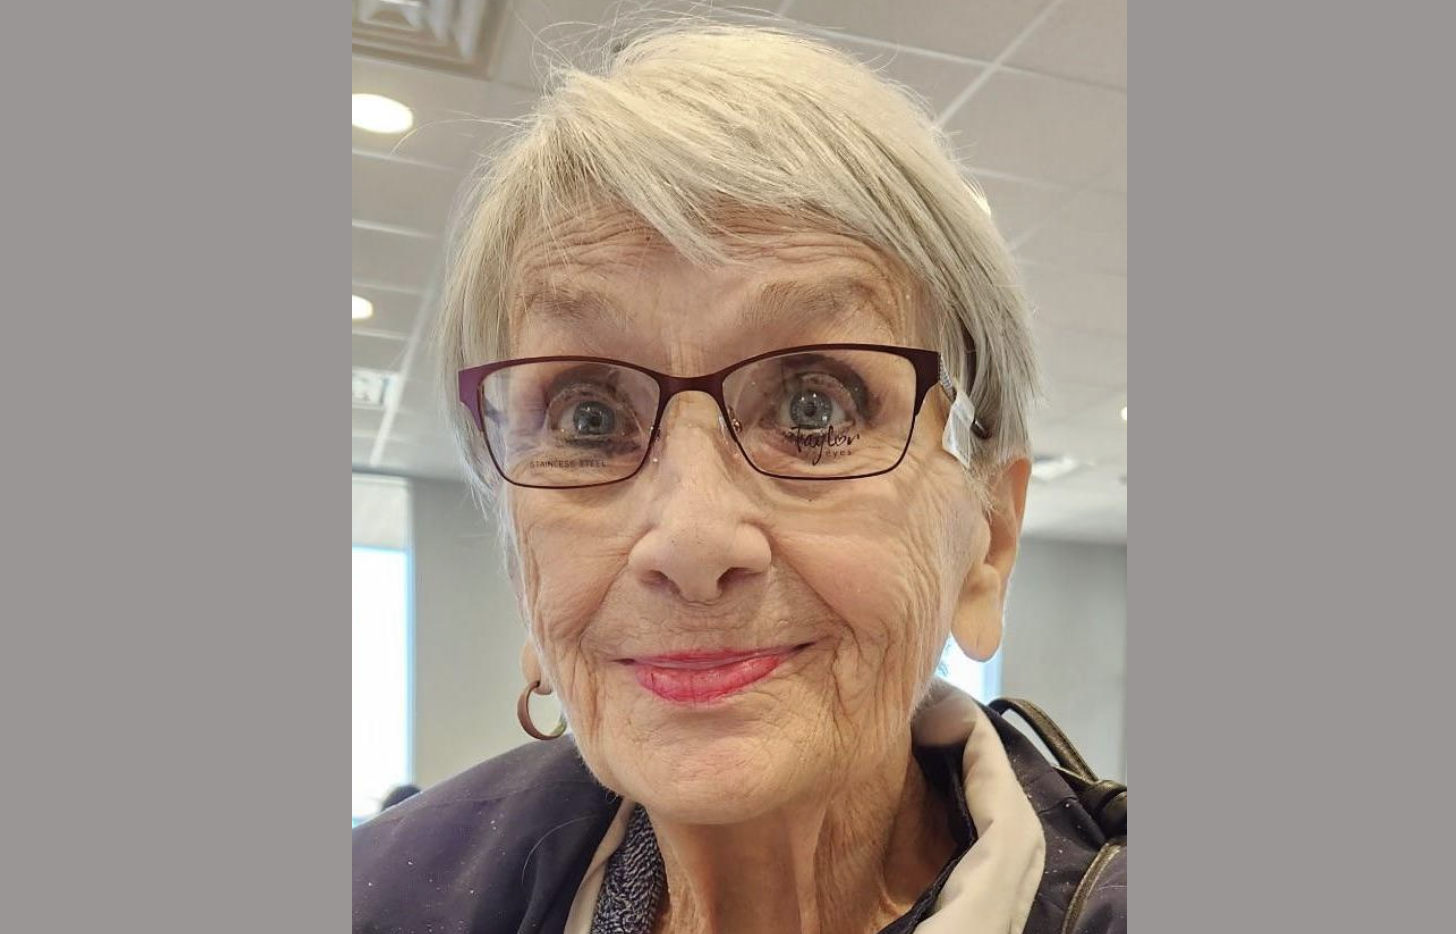 Daytime interior photo of a happy and energetic looking elderly lady with short gray hair and black-rimmed glasses.